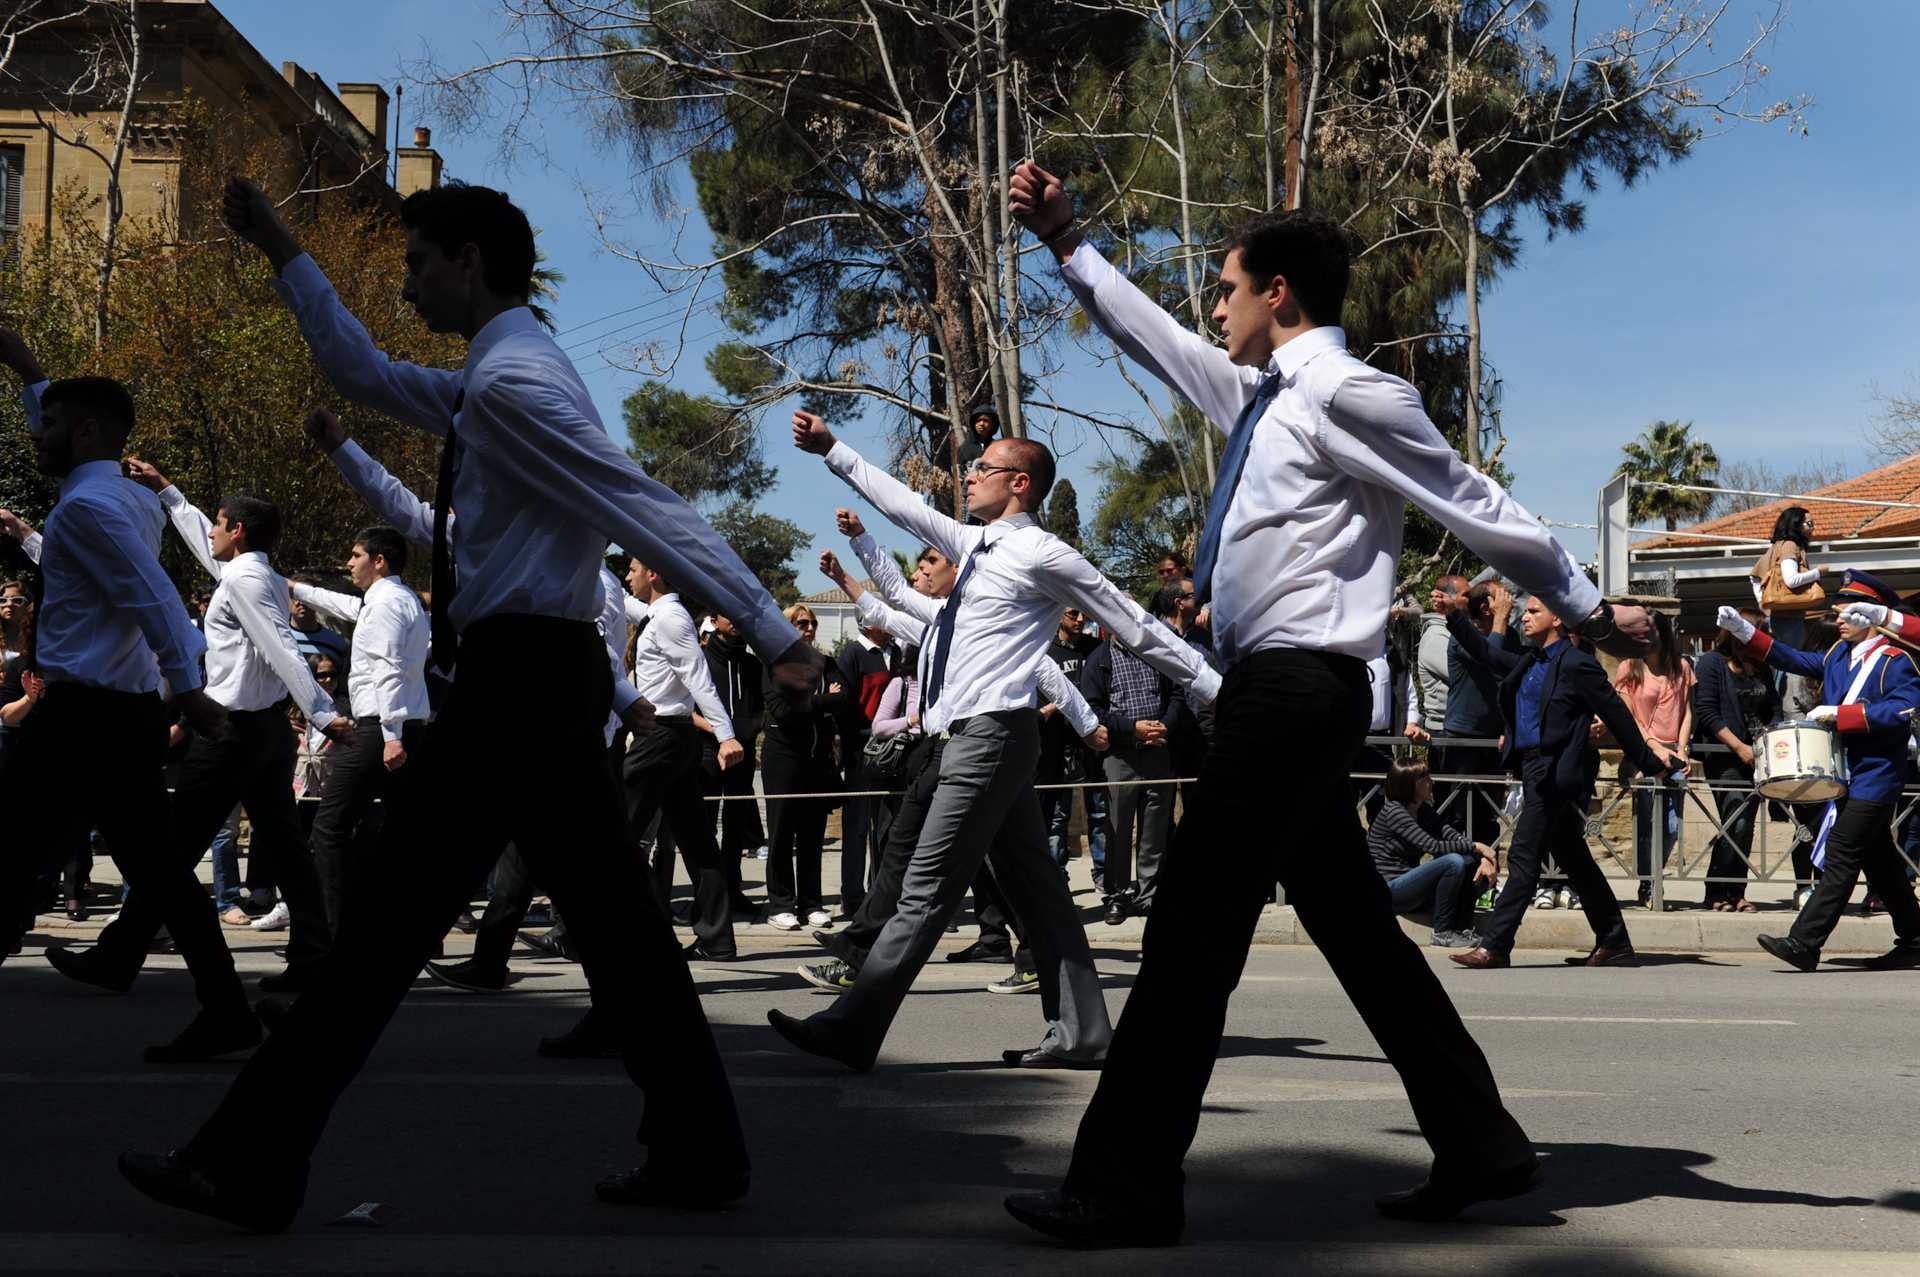 NICOSIA, CYPRUS.  Men are seen marching in the Cypriot National Day military parade on March 25, 2013. Late last night, the IMF, the EU and the Cypriot government reached a deal to rescue the Cypriot banking sector and economy by imposing capital controls, but many are fearful of what the week may have in store as Cypriots look to withdraw their savings from the bank and much of Greek Cyprus has converted to a cash only economy.